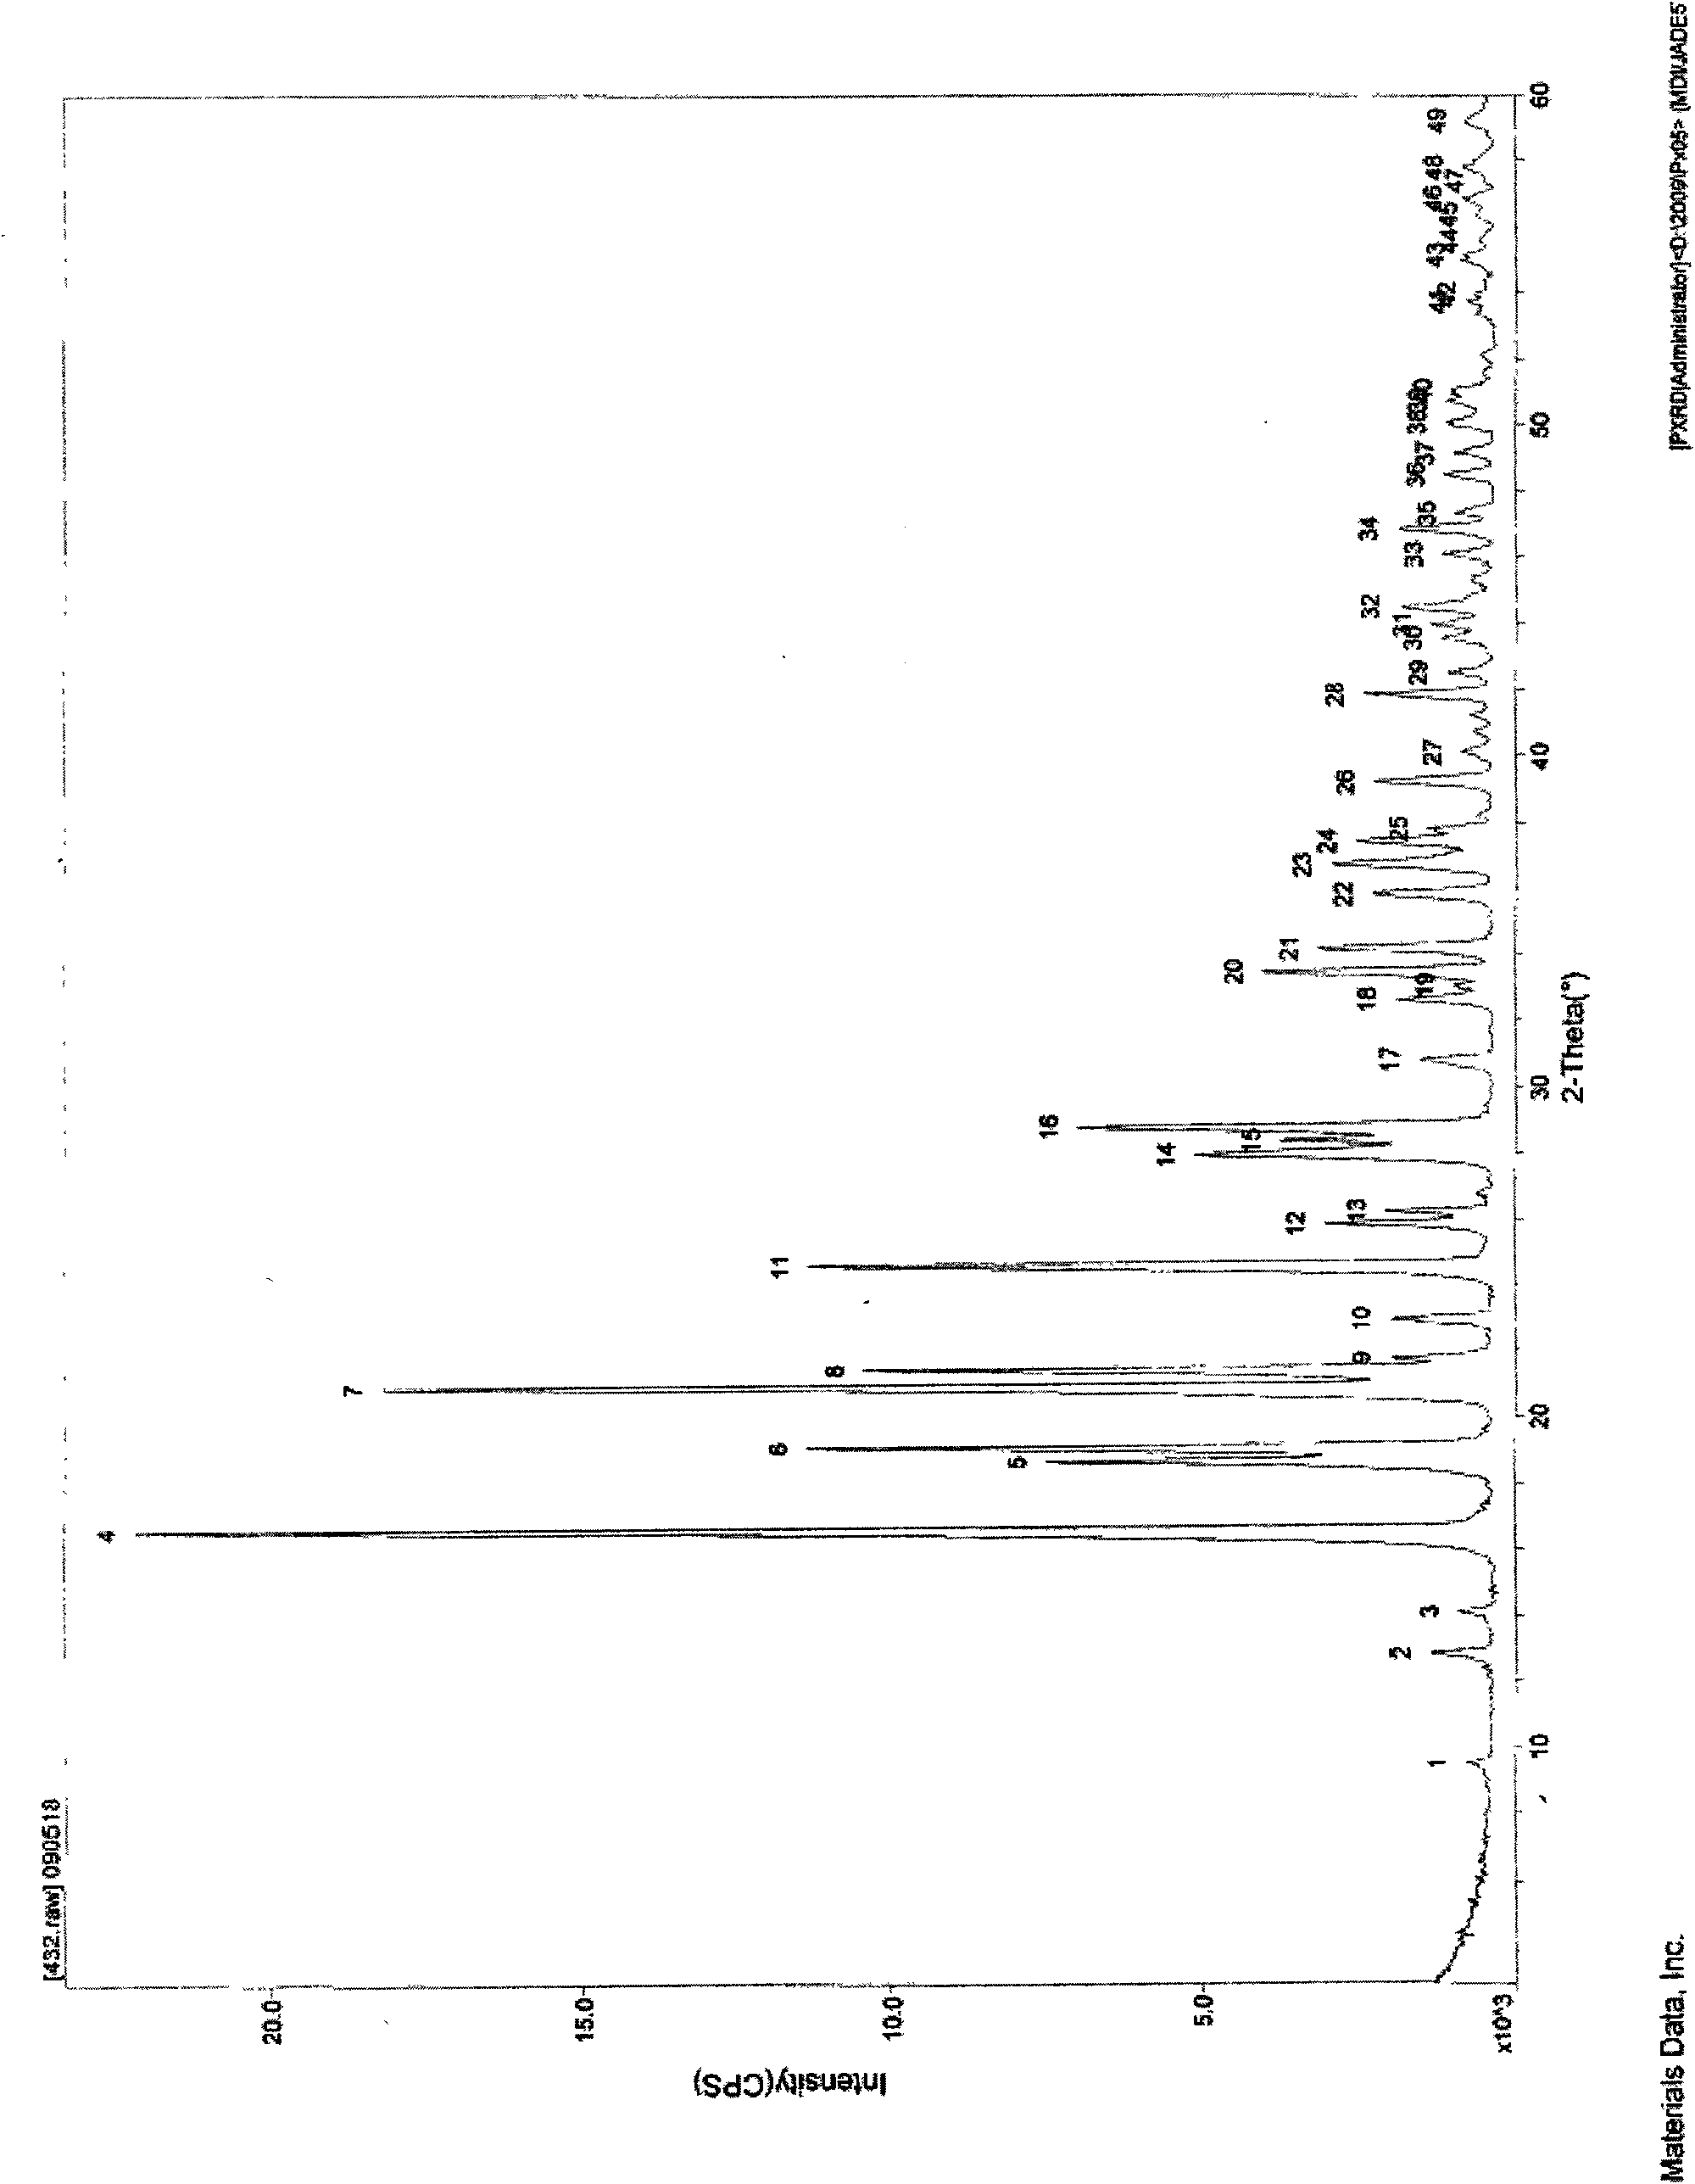 Crystalline form of hydrochlorothiazide and application thereof